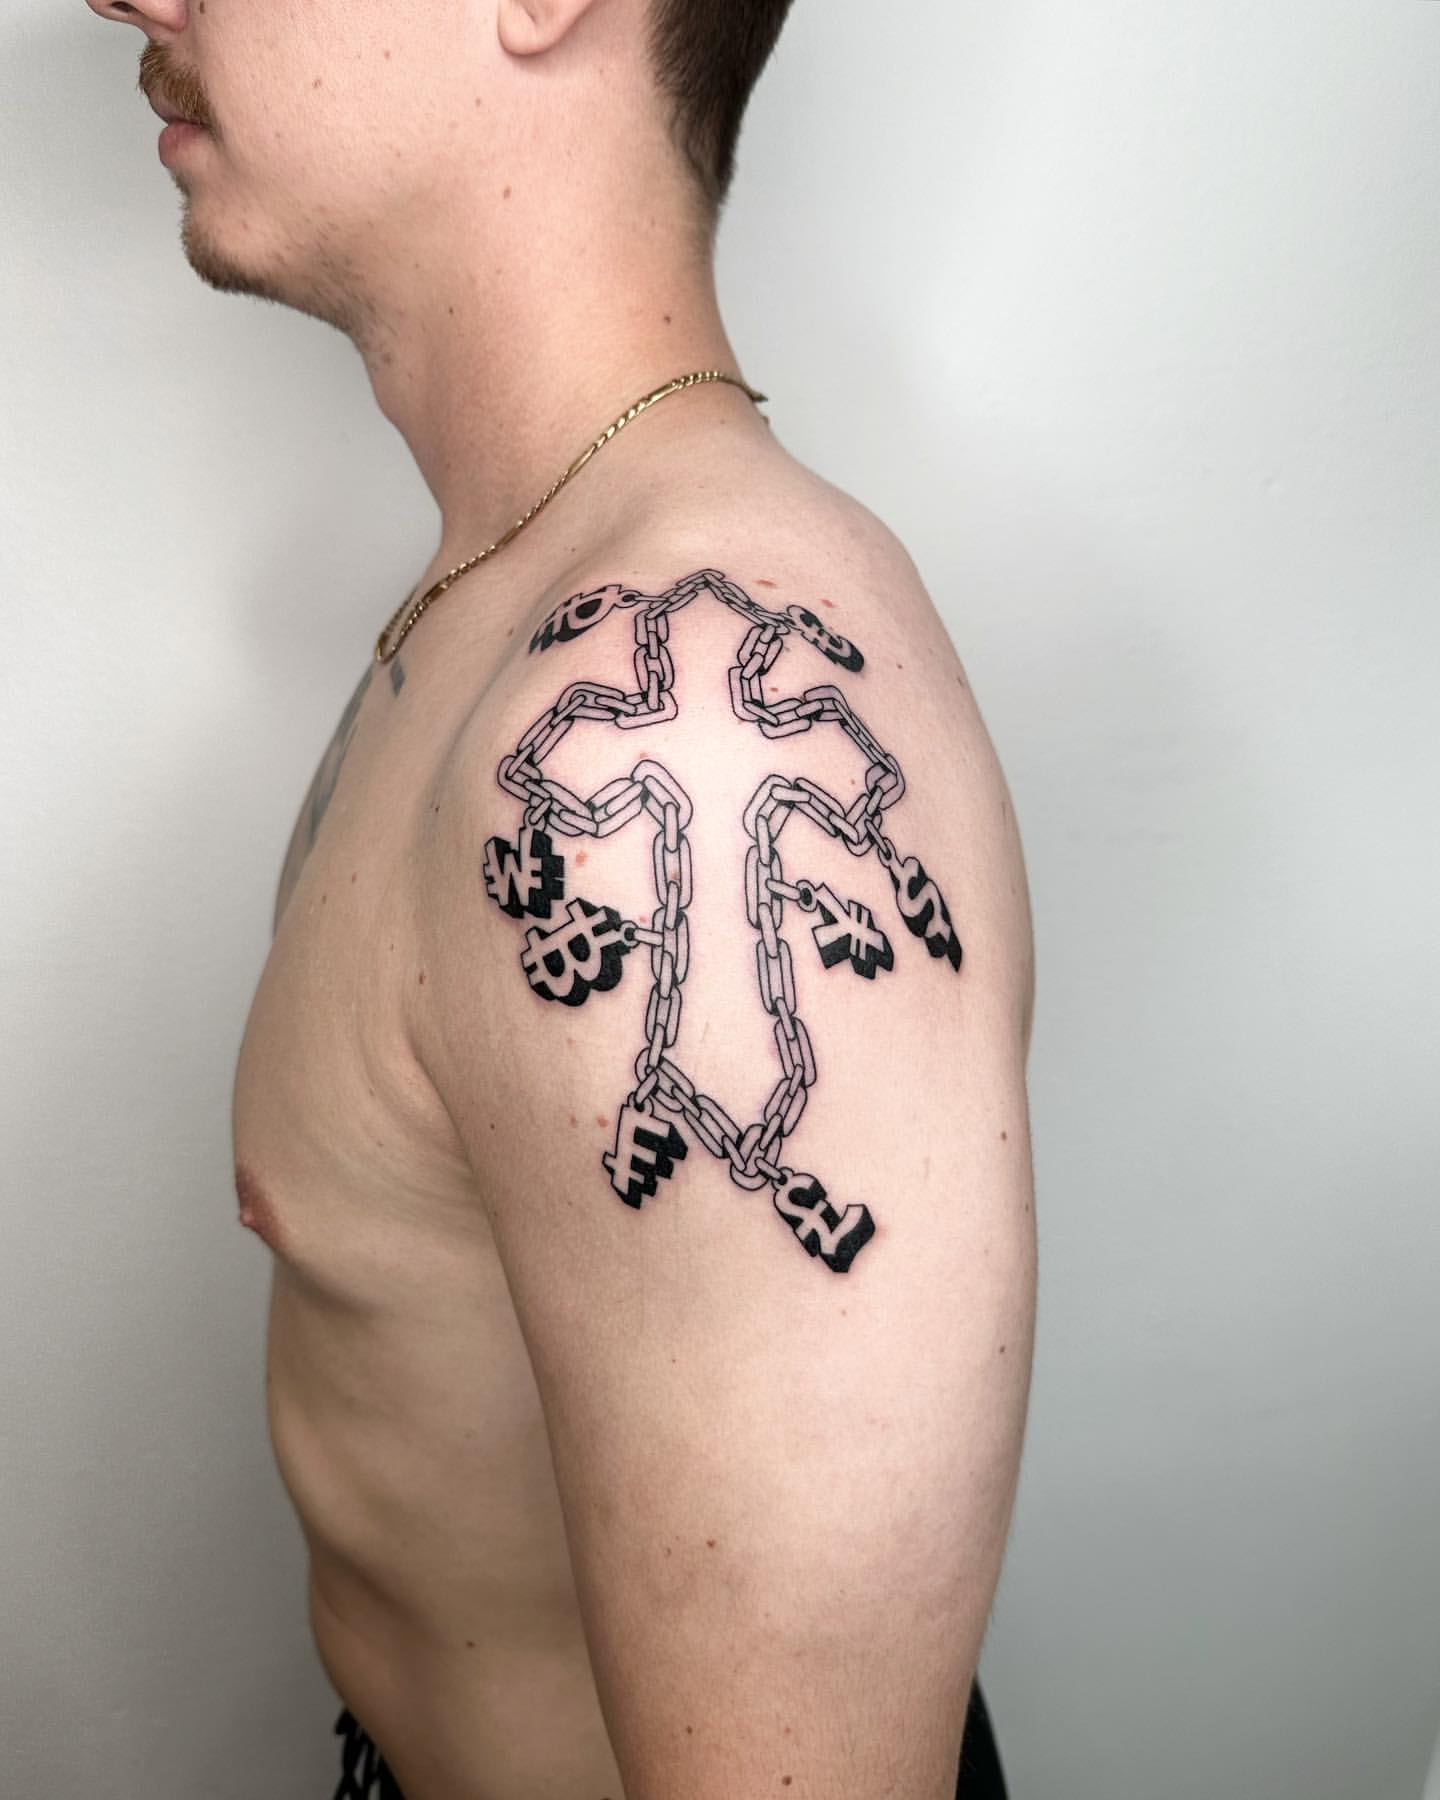 Chest tattoo religious theme. Jesus Cross and Virgin Marry tattoo. Pepper  shading technique - YouTube